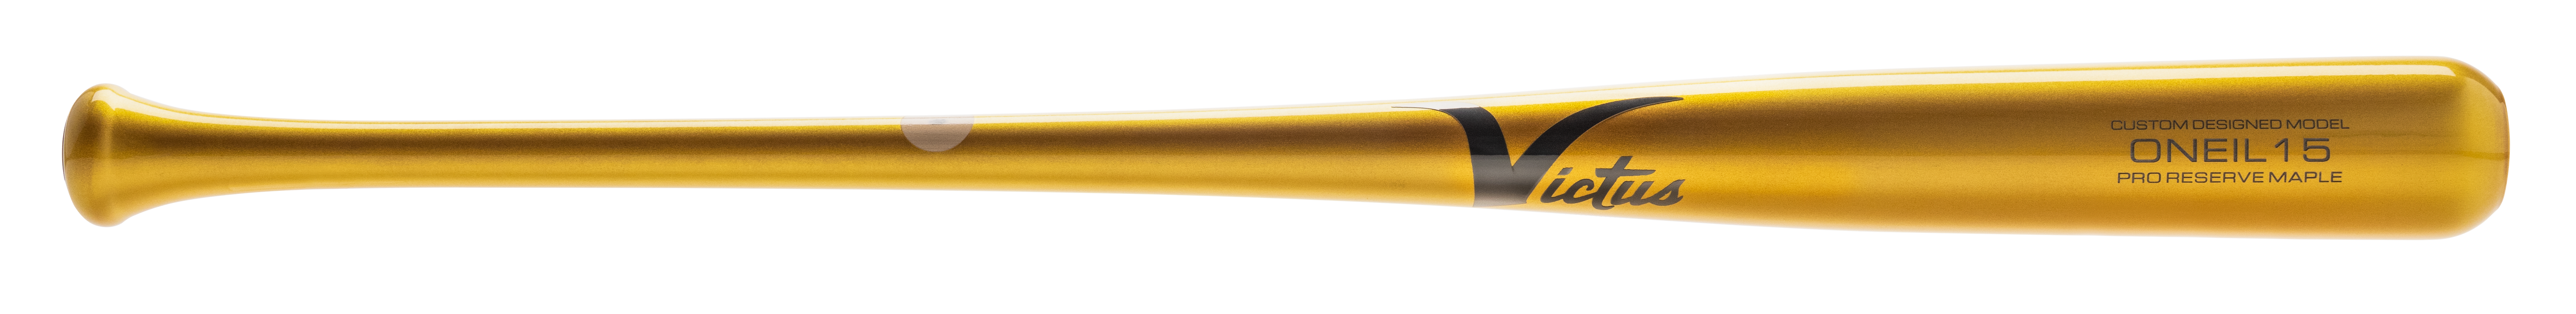 Victus ONEIL15 Gloss Gold Maple Pro Reserve